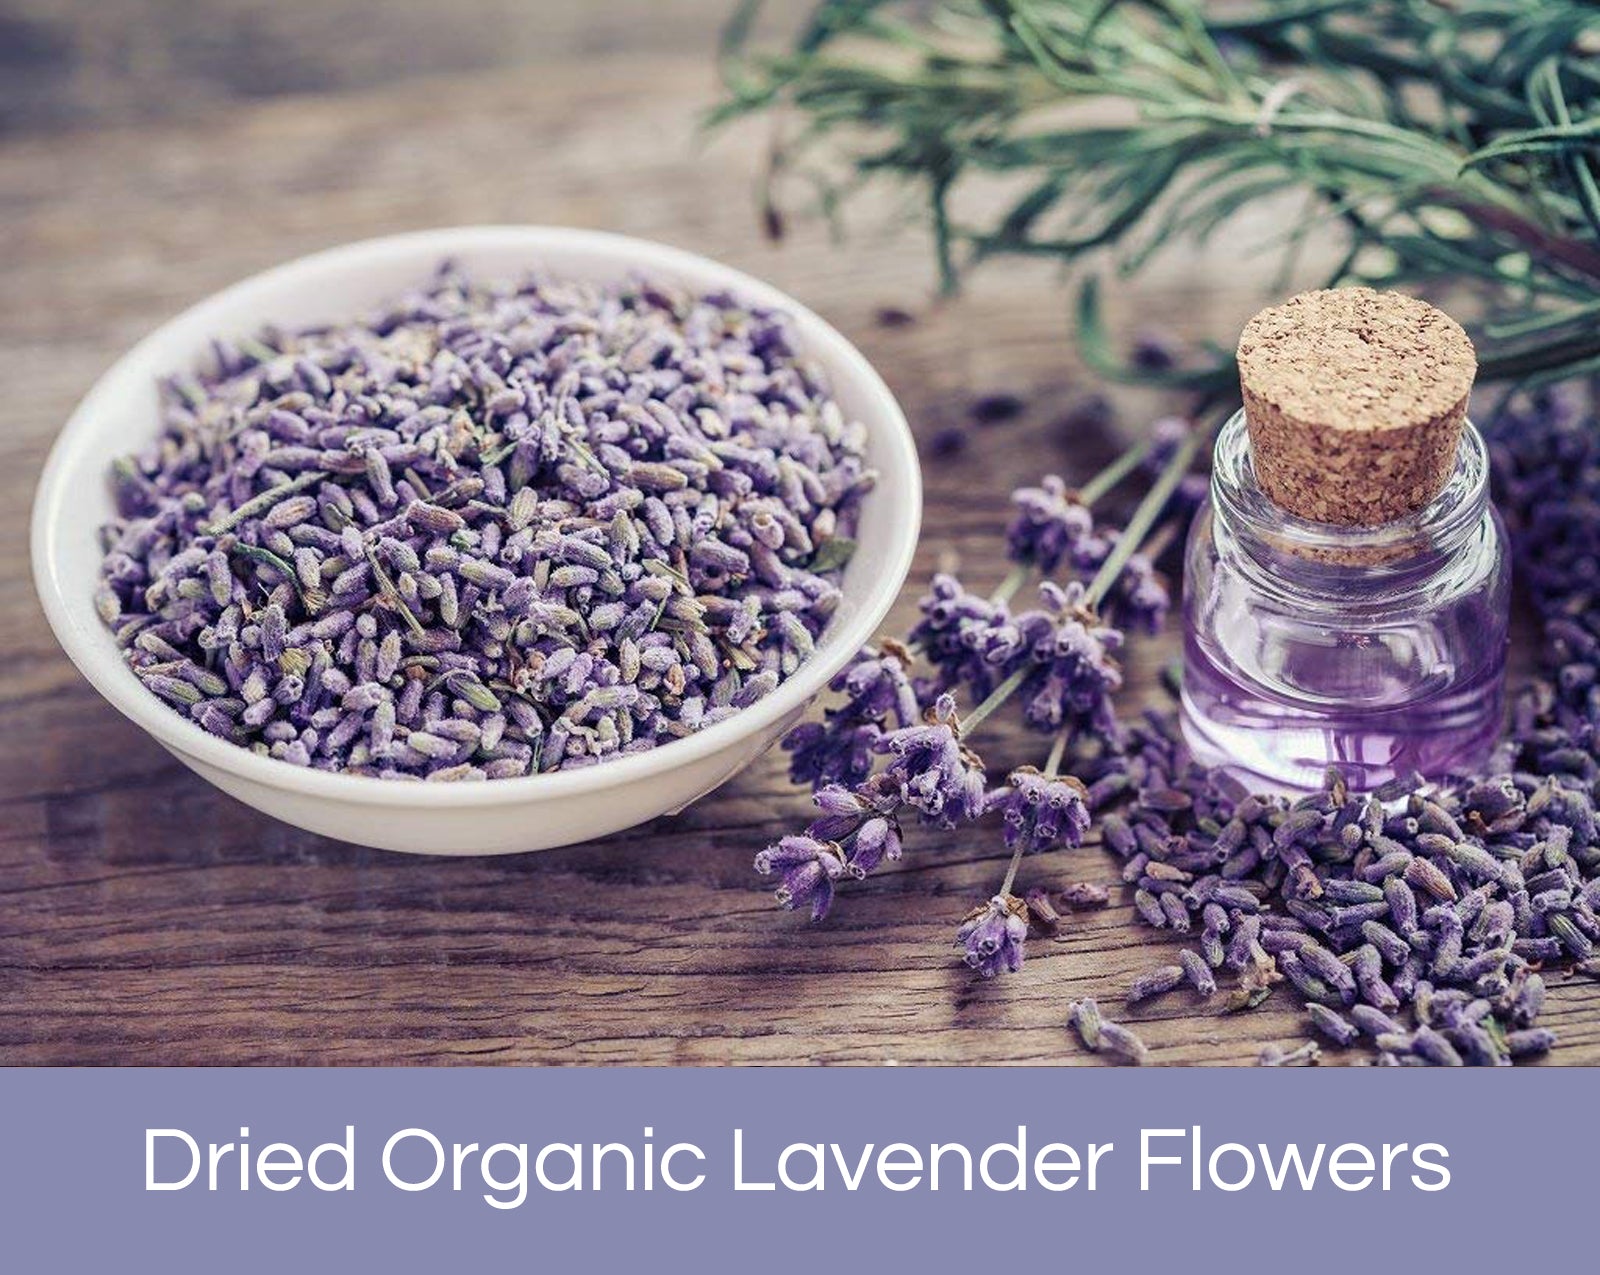 Lavender Extract for Baking & Drinks (1oz) By Kate Naturals. 100% Natural &  Vegan Lavender Flavoring. Delicious Gluten Free Food-Grade Edible Lavender  Oil. Culinary Lavender Extract for Cooking